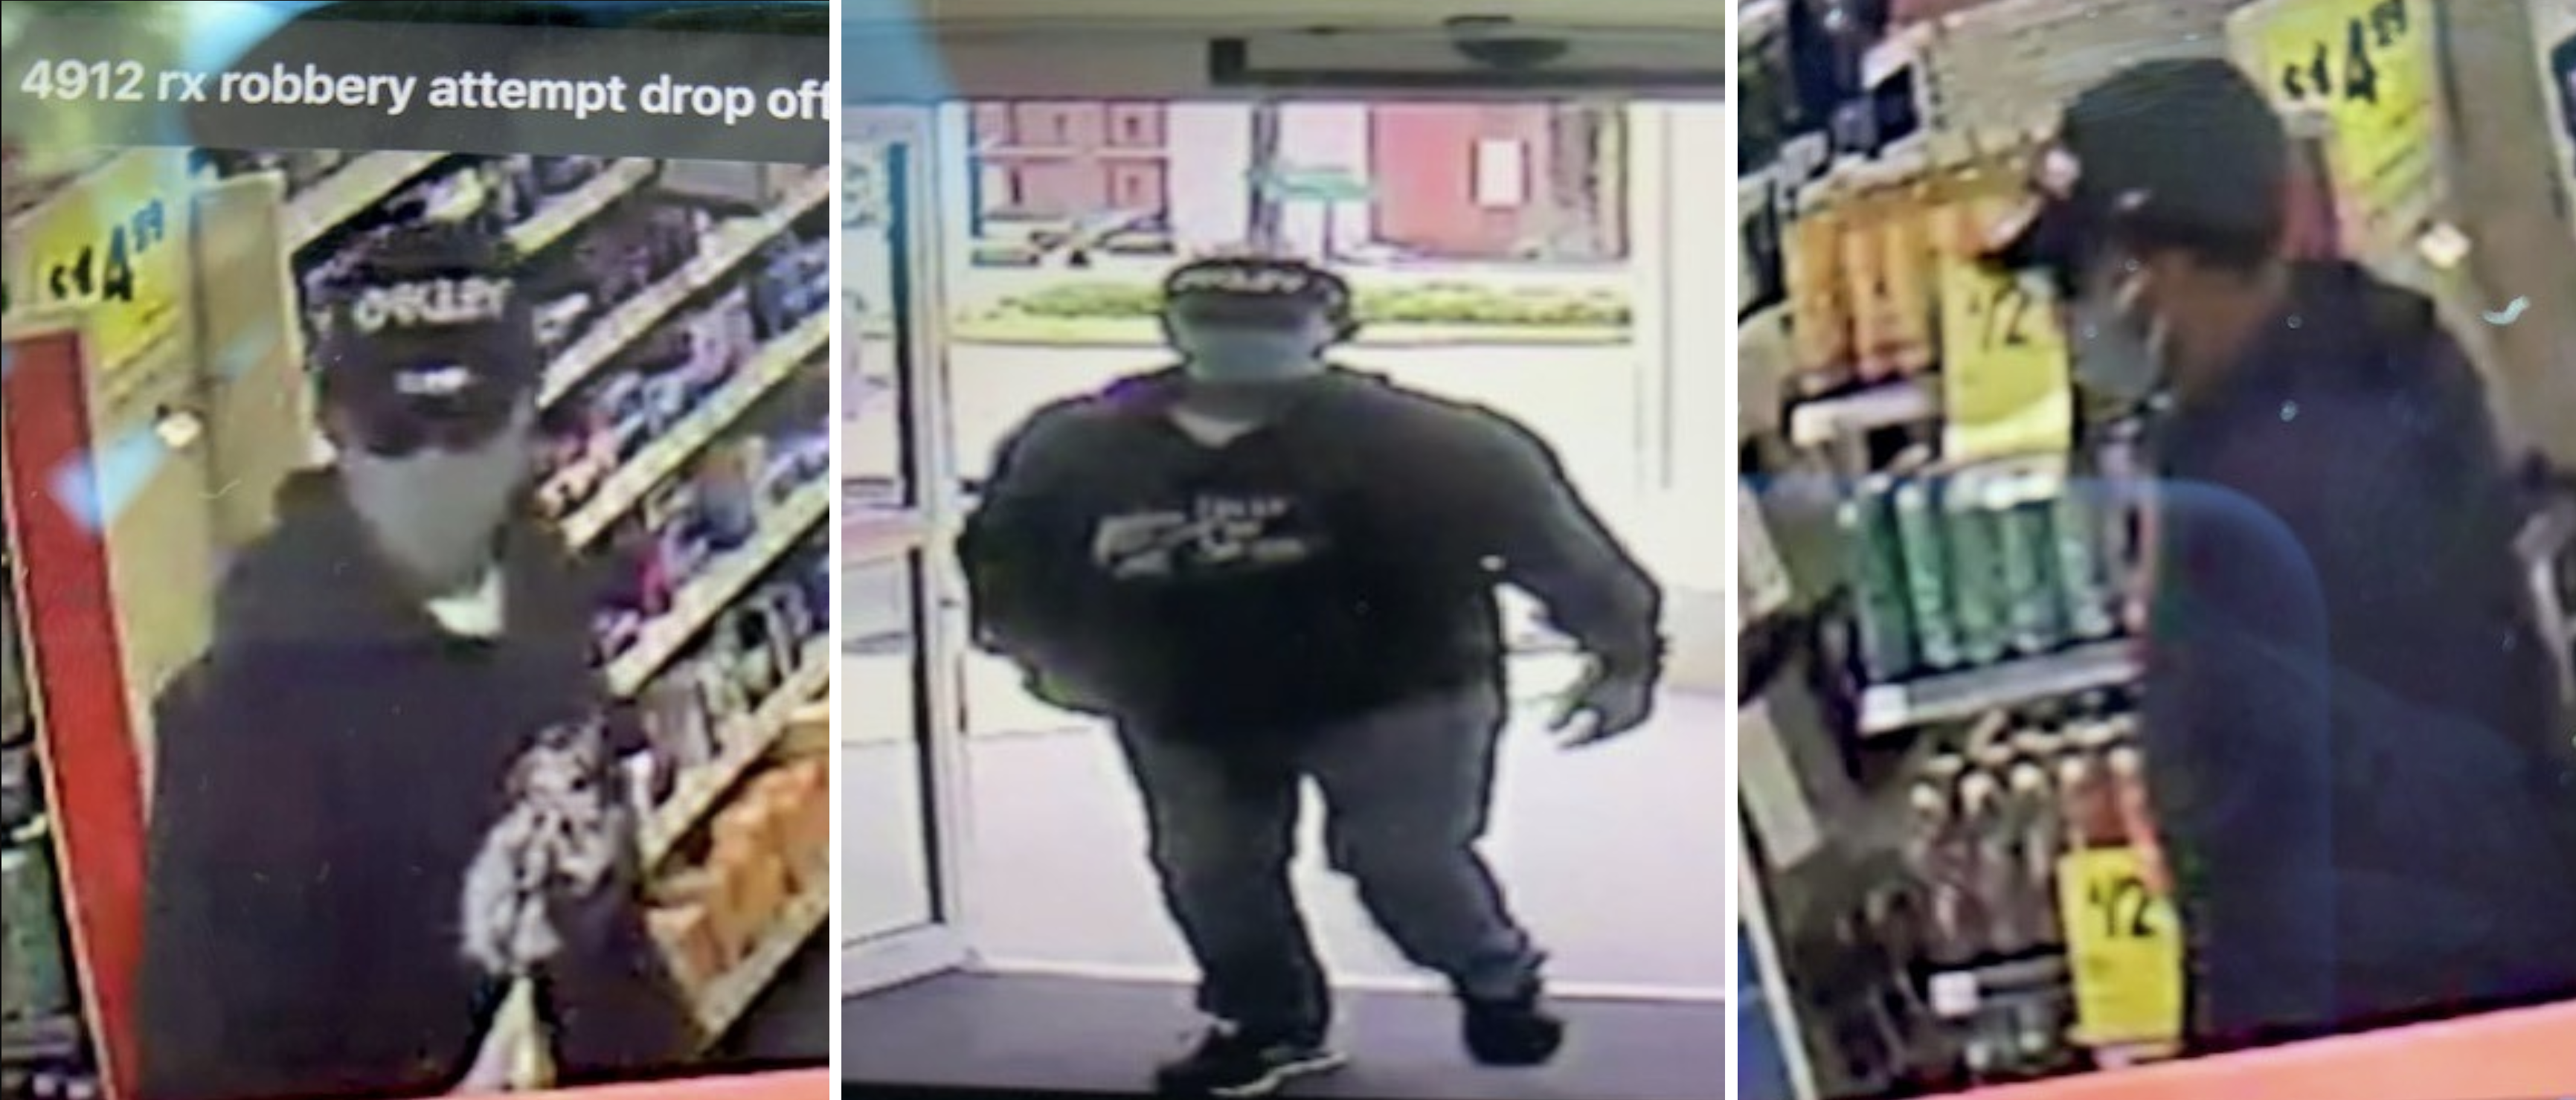 Center Point CVS employees refuse to give would-be robber drugs